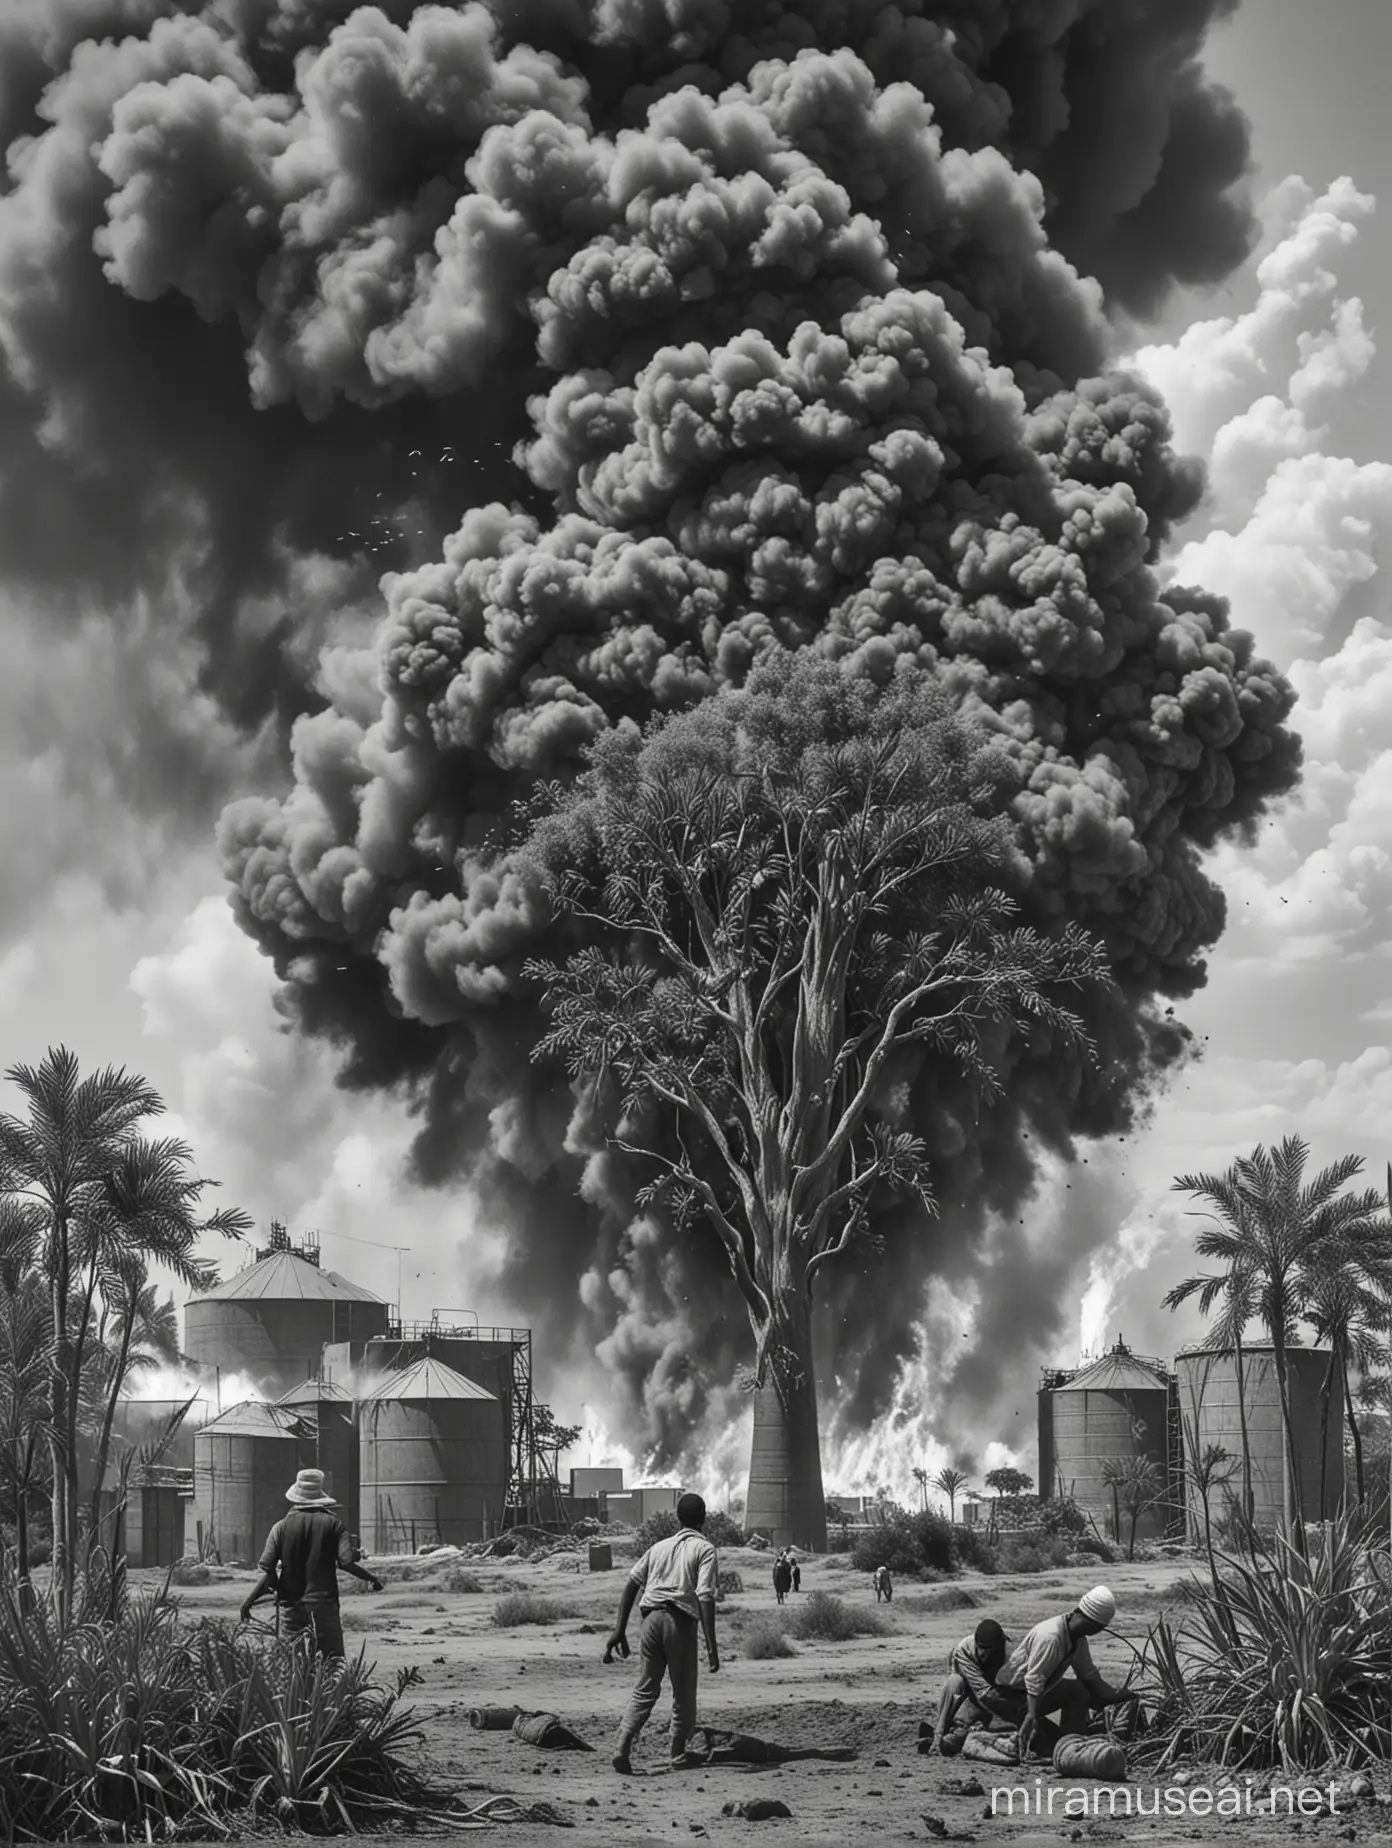 a monochrome novel cover is drawn by hand has a  Fire and burning of crops and grain storage tanks, Men from Upper Egypt ,A symbolic use of the revolution, A great camphor tree 